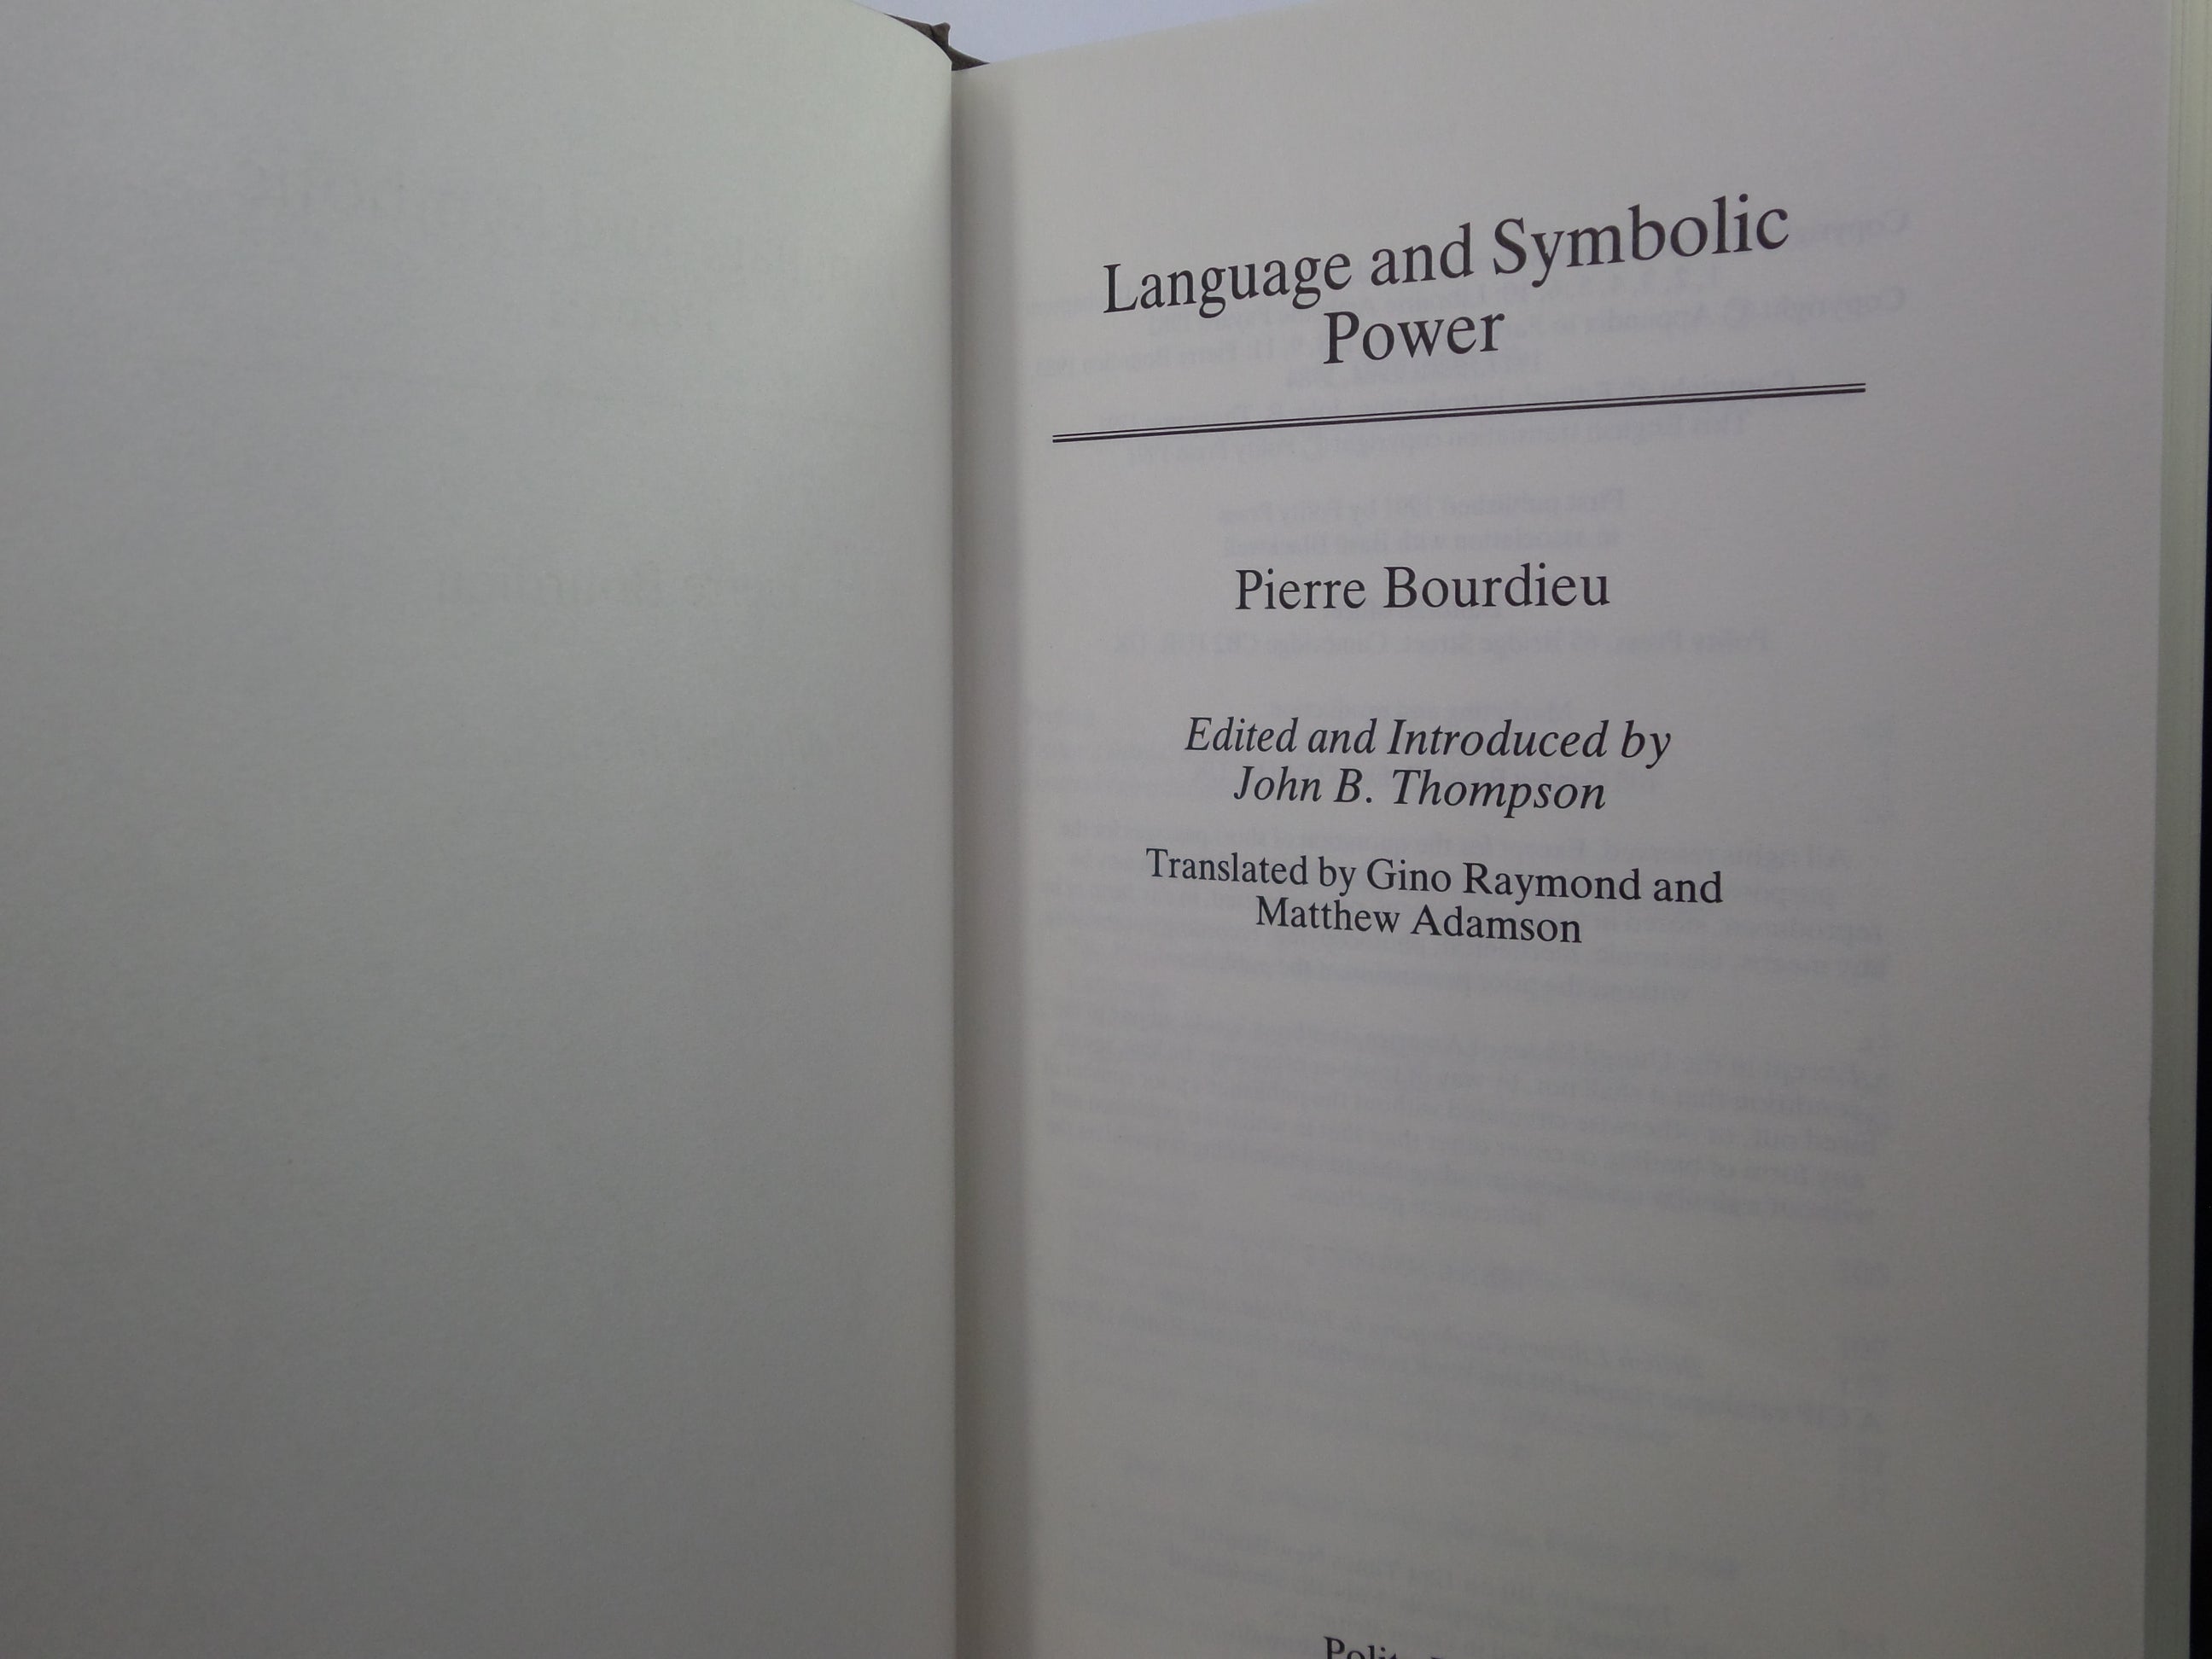 LANGUAGE AND SYMBOLIC POWER BY PIERRE BOURDIEU 1991 HARDCOVER